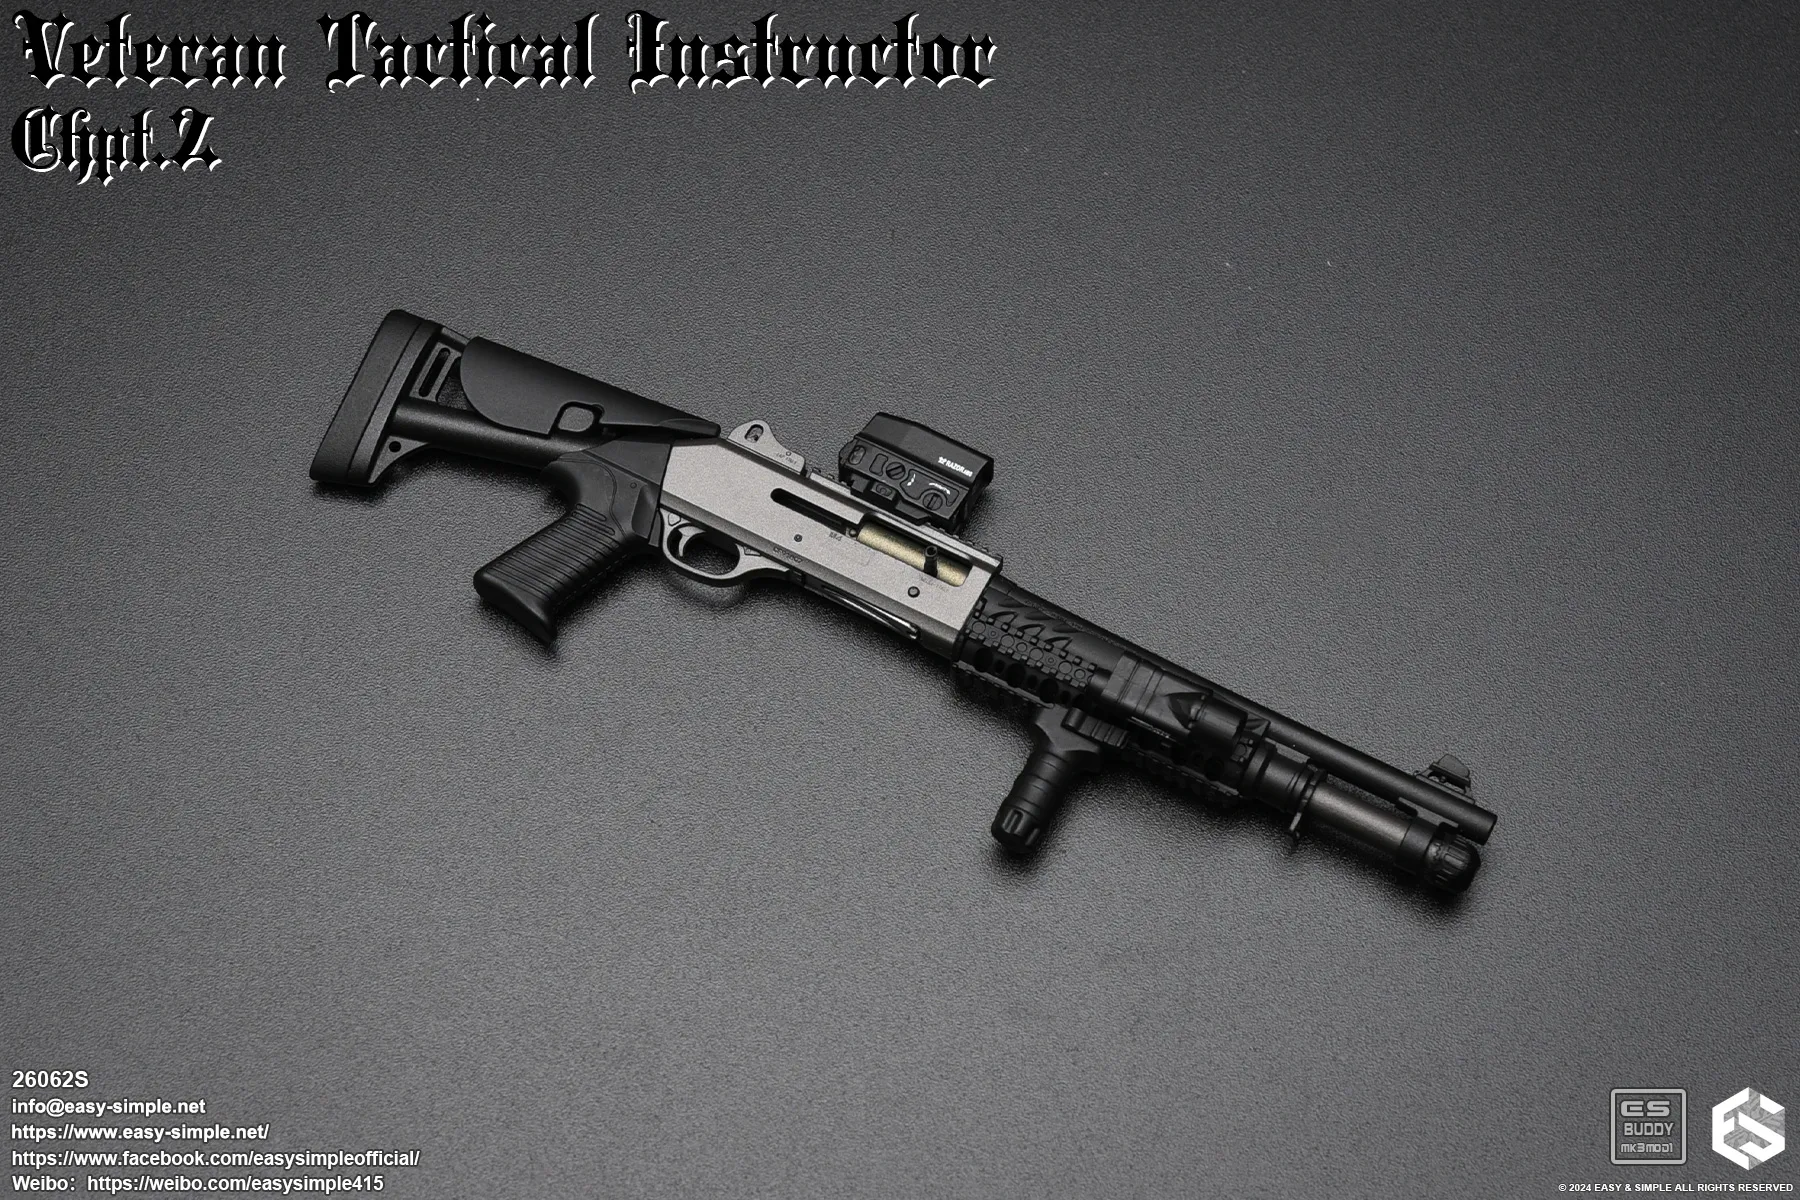 tactical - NEW PRODUCT: Easy & Simple Veteran Tactical Instructor Chapter II 26062S Format,webp